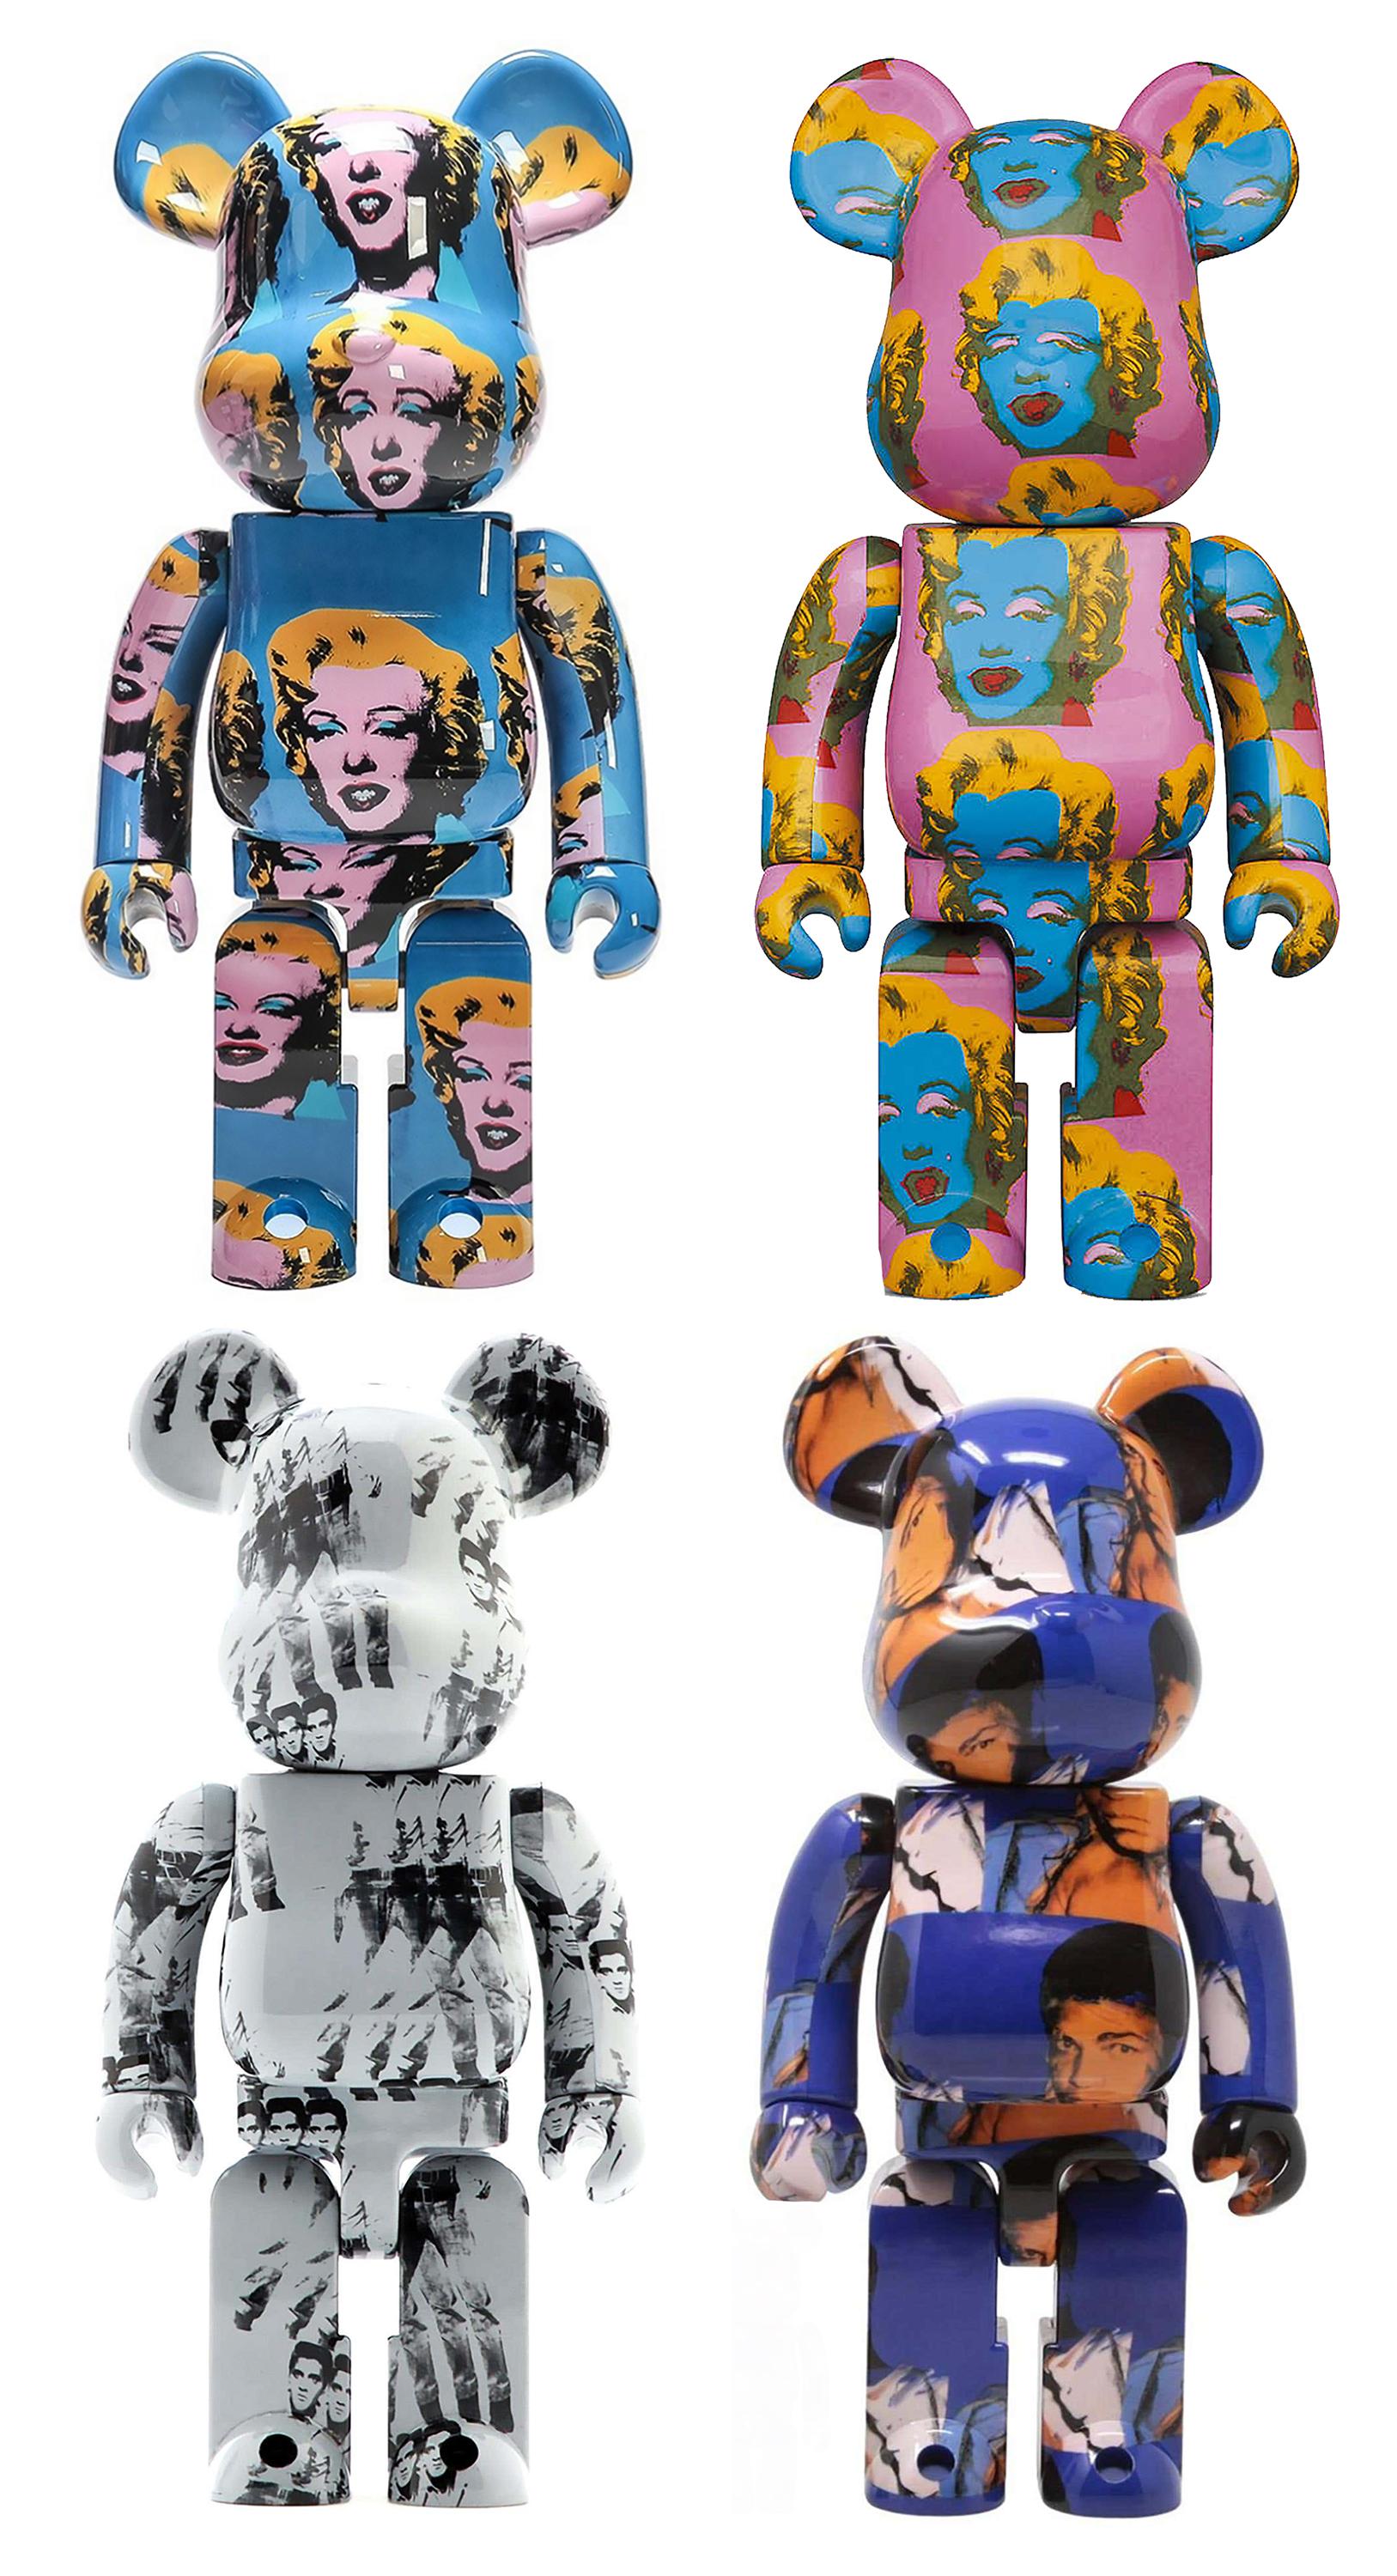 Andy Warhol Bearbrick 400% set of 4 works (Warhol BE@RBRICK)  - Sculpture by (after) Andy Warhol